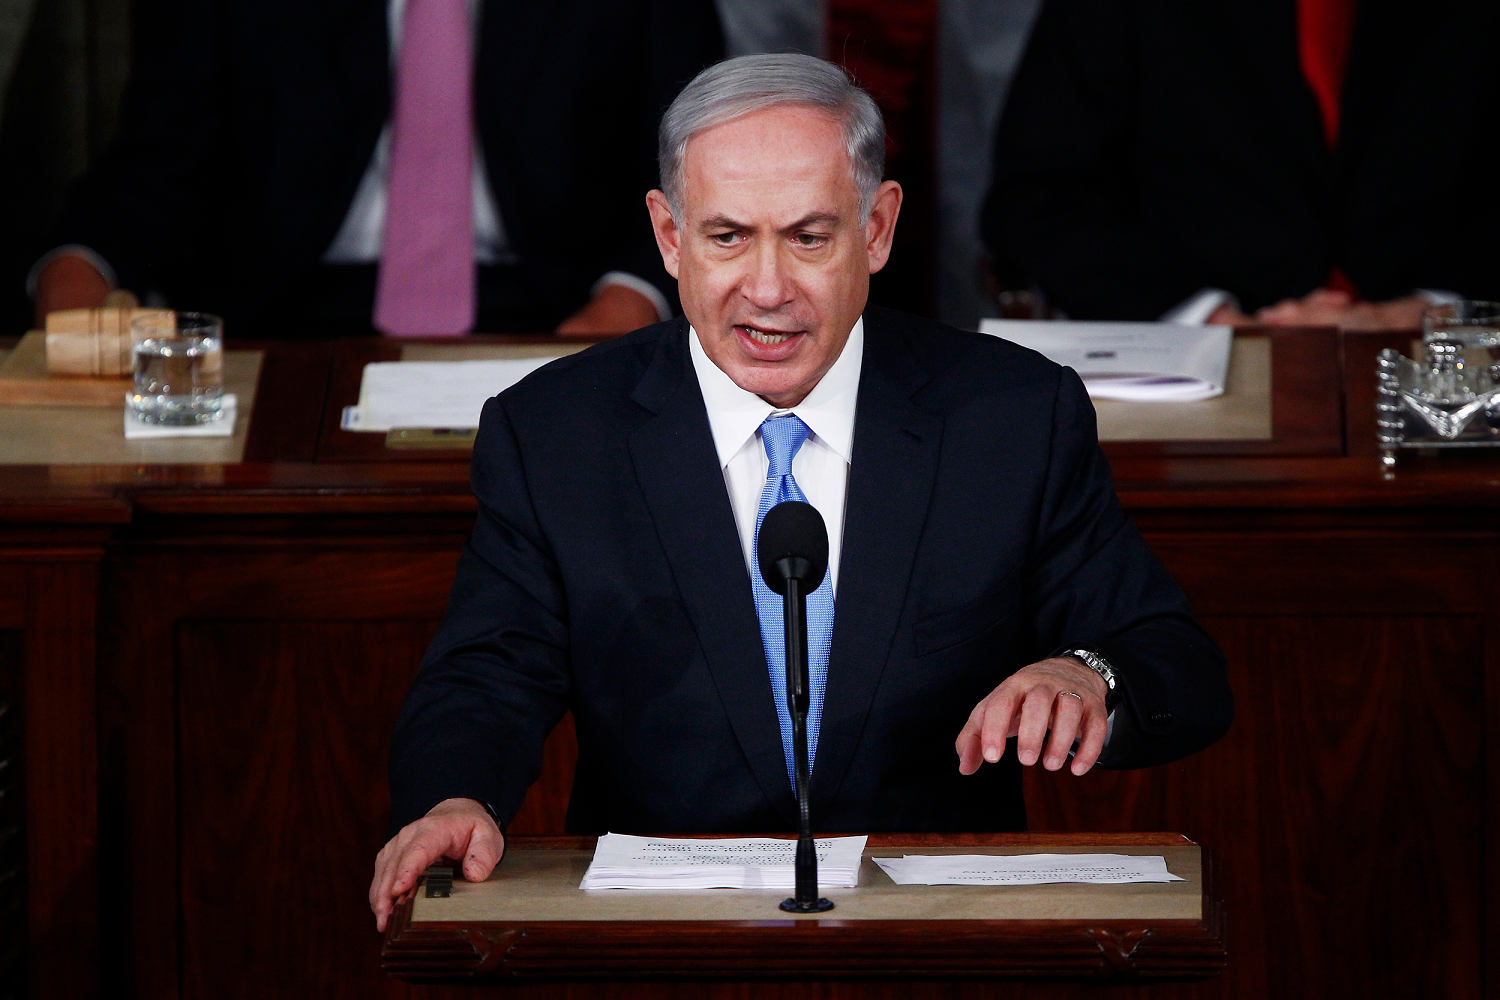 Netanyahu to address Congress for first time since Oct. 7 attack on Israel